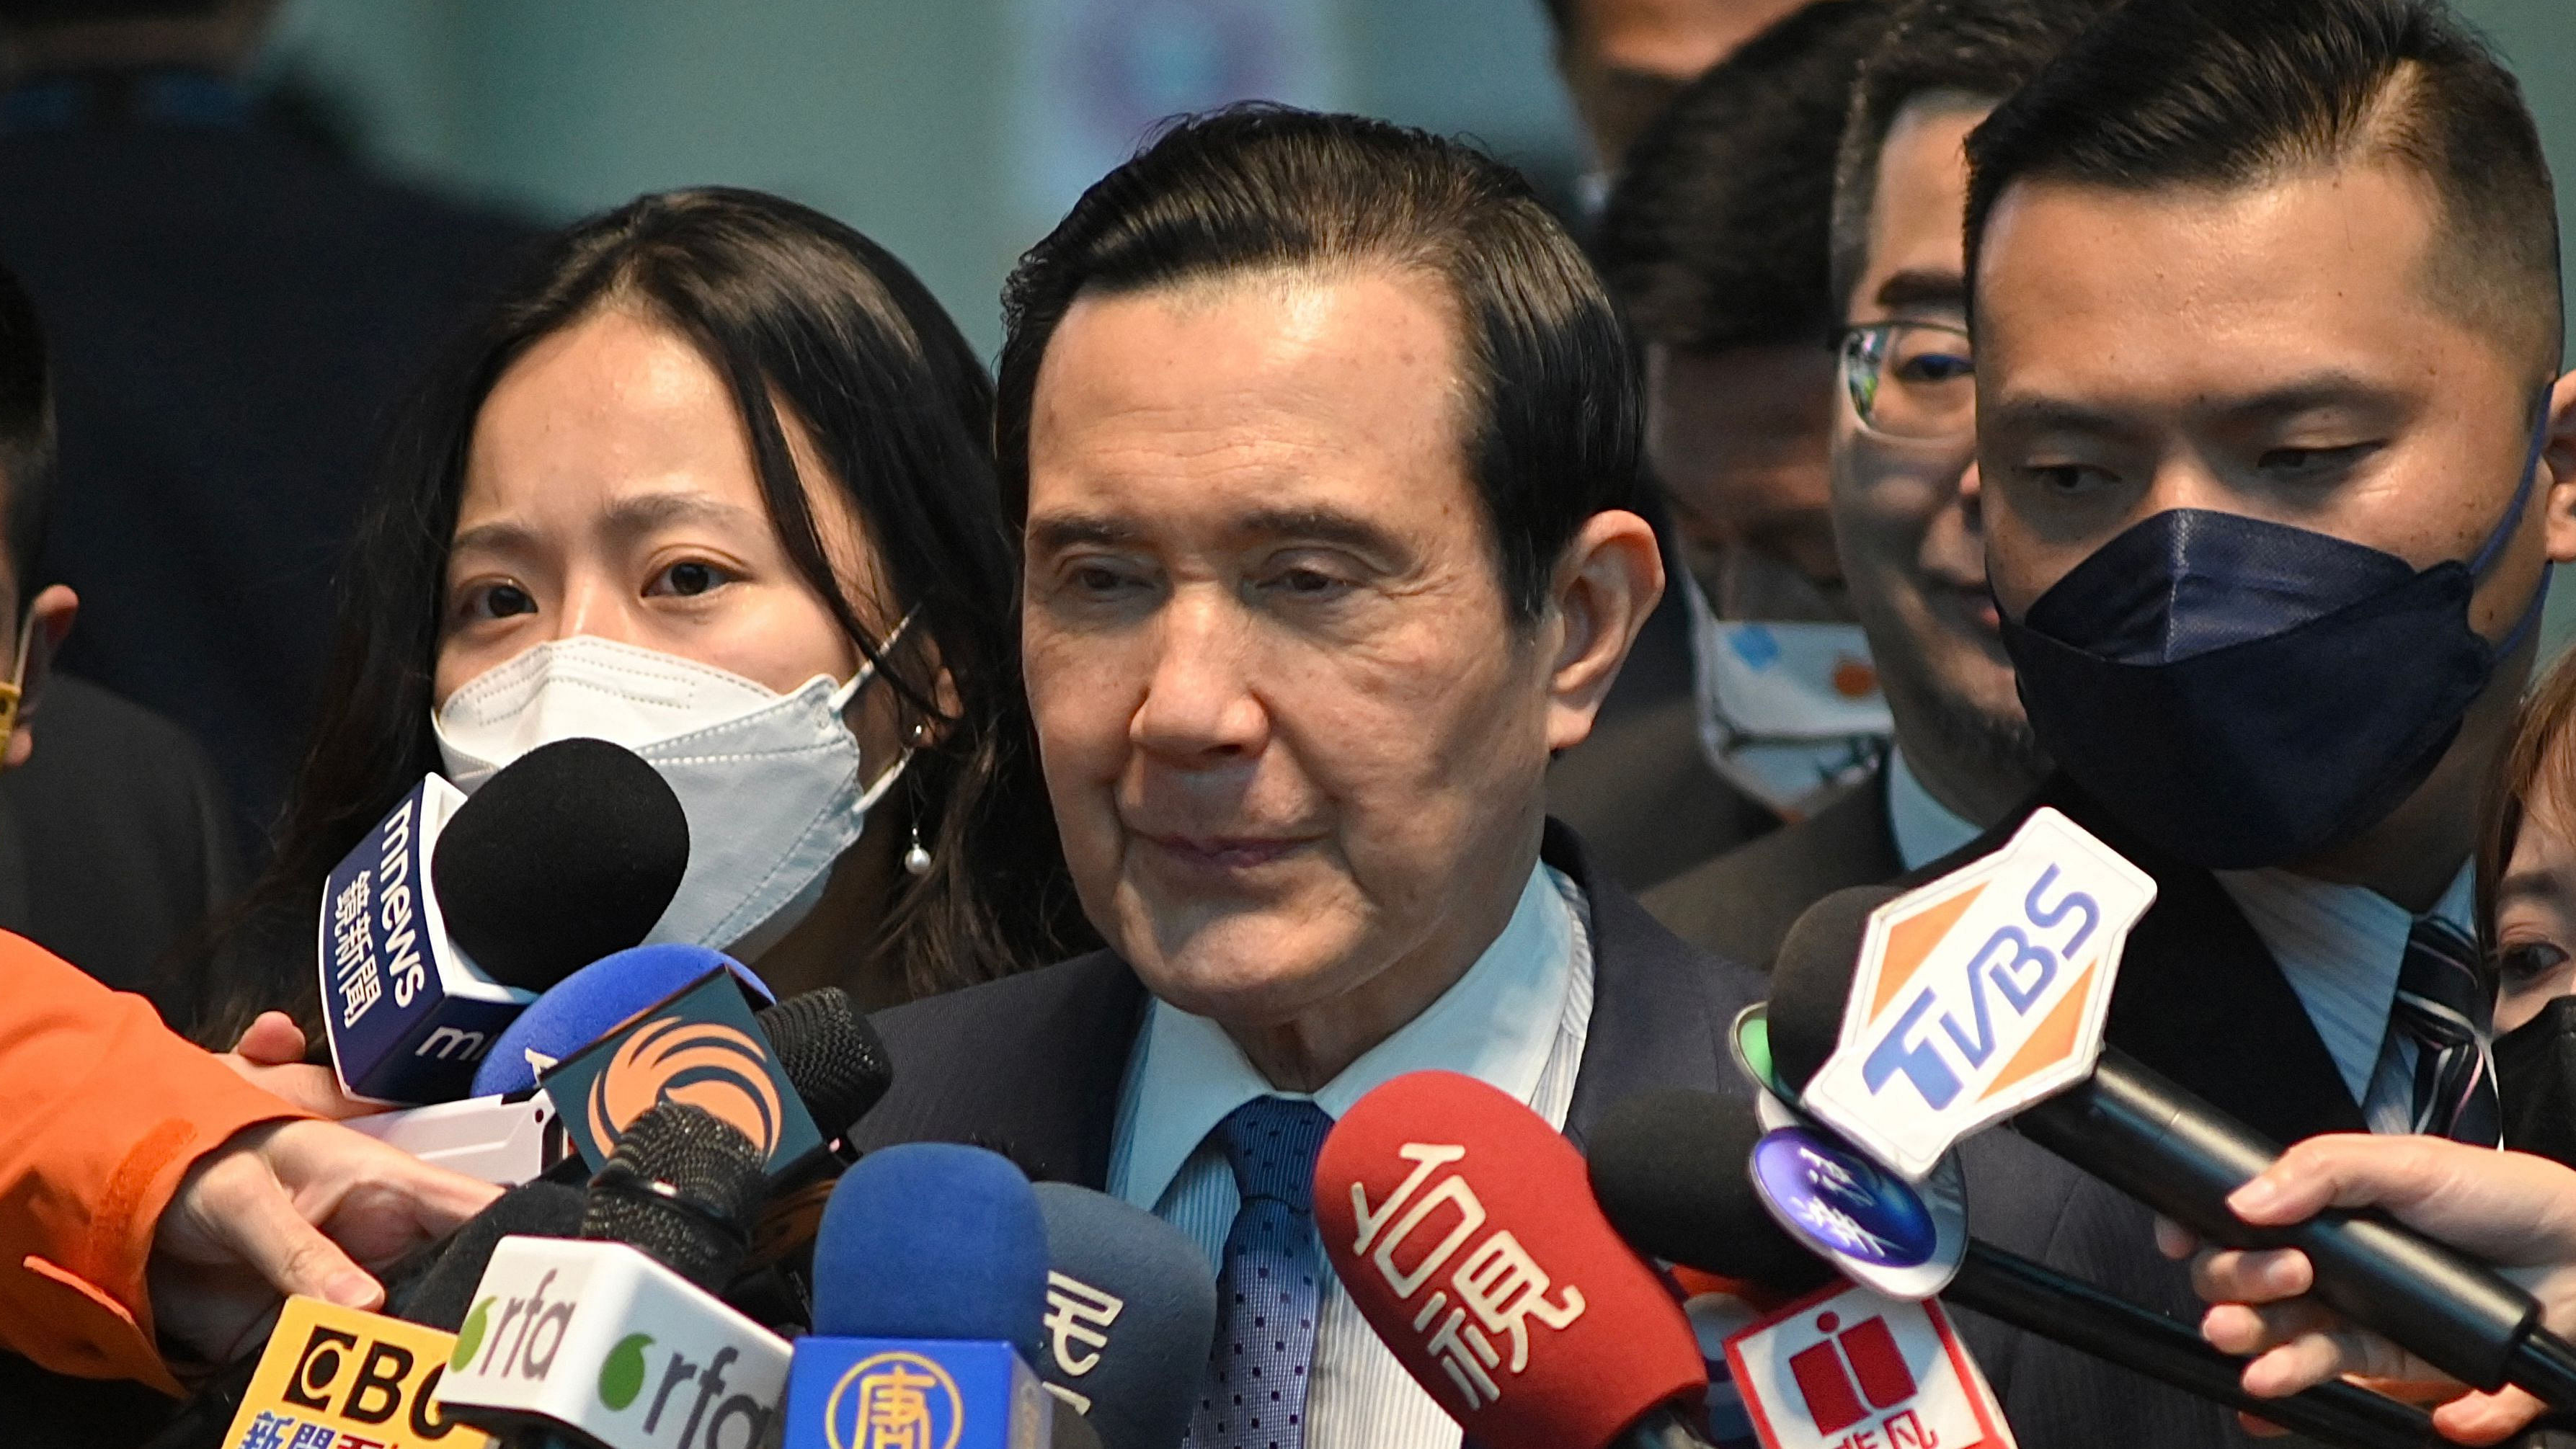 Former President of Taiwan, Ma Ying-jeou, has set on a 12-dat visit to China starting on March 27. This will be the first visit to China by a Taiwanese leader in the last seven decades. Credit: AFP Photo